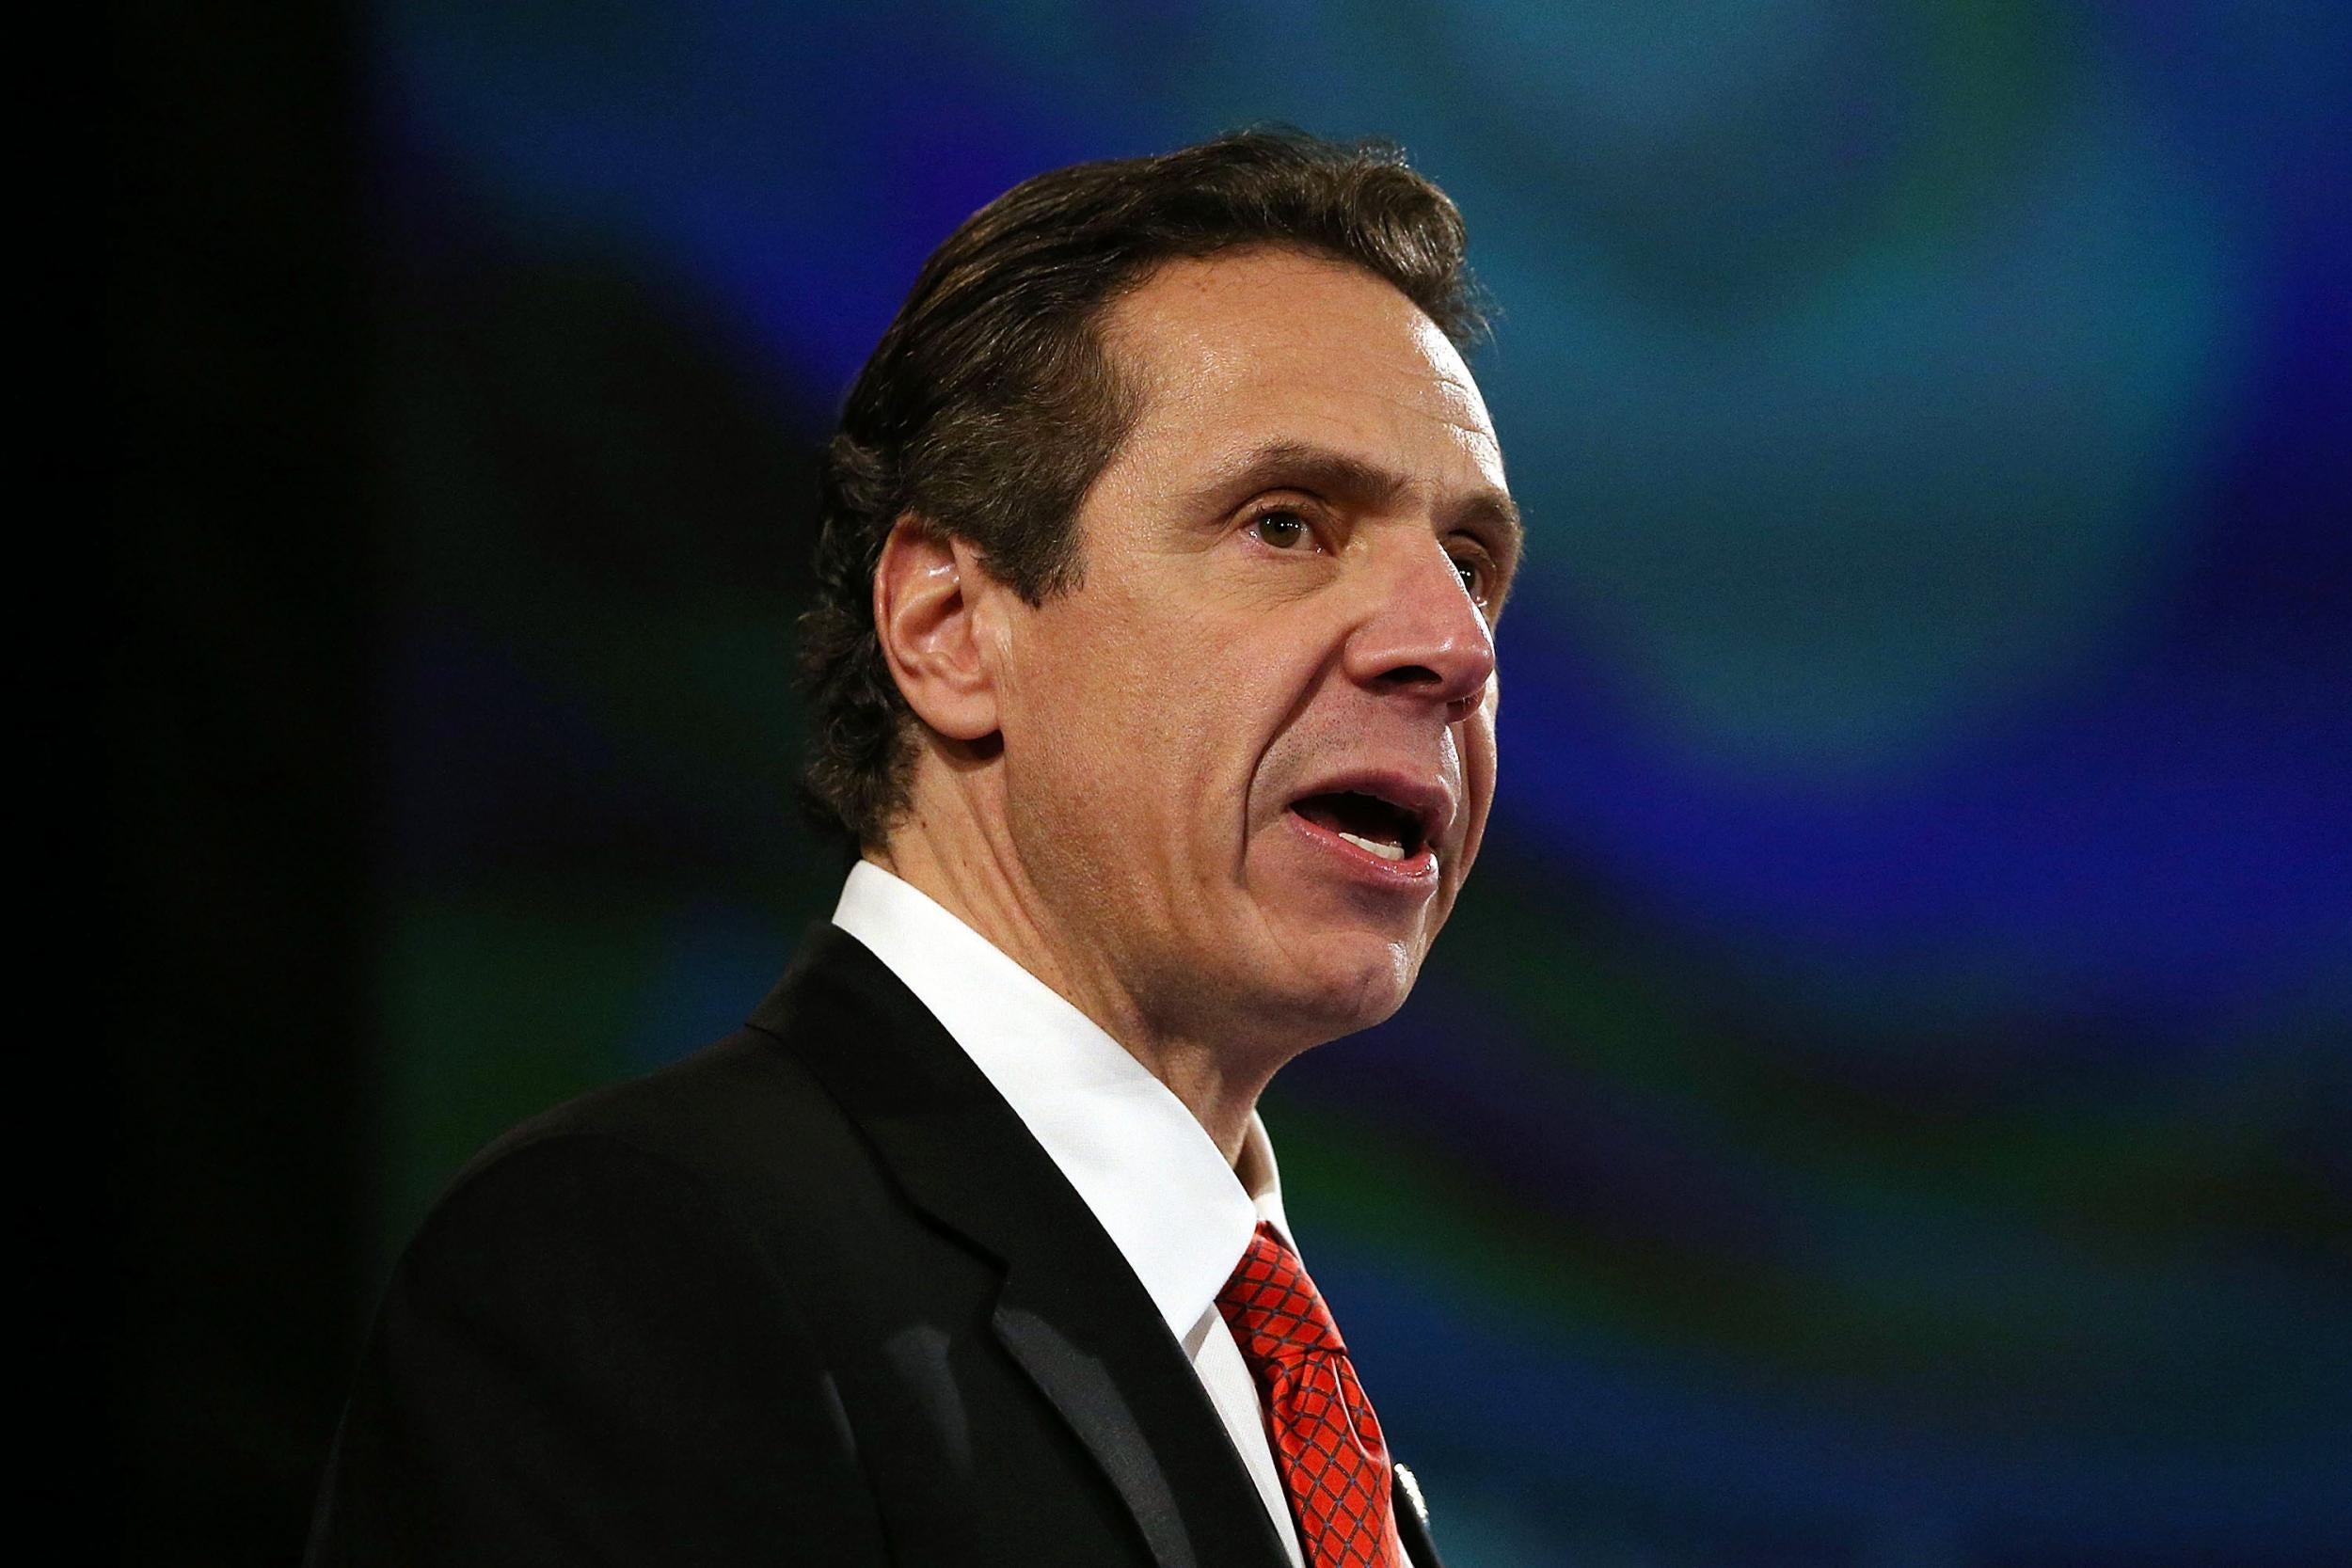 Governor Cuomo's decision could affect up to 10,000 nonviolent offenders statewide.